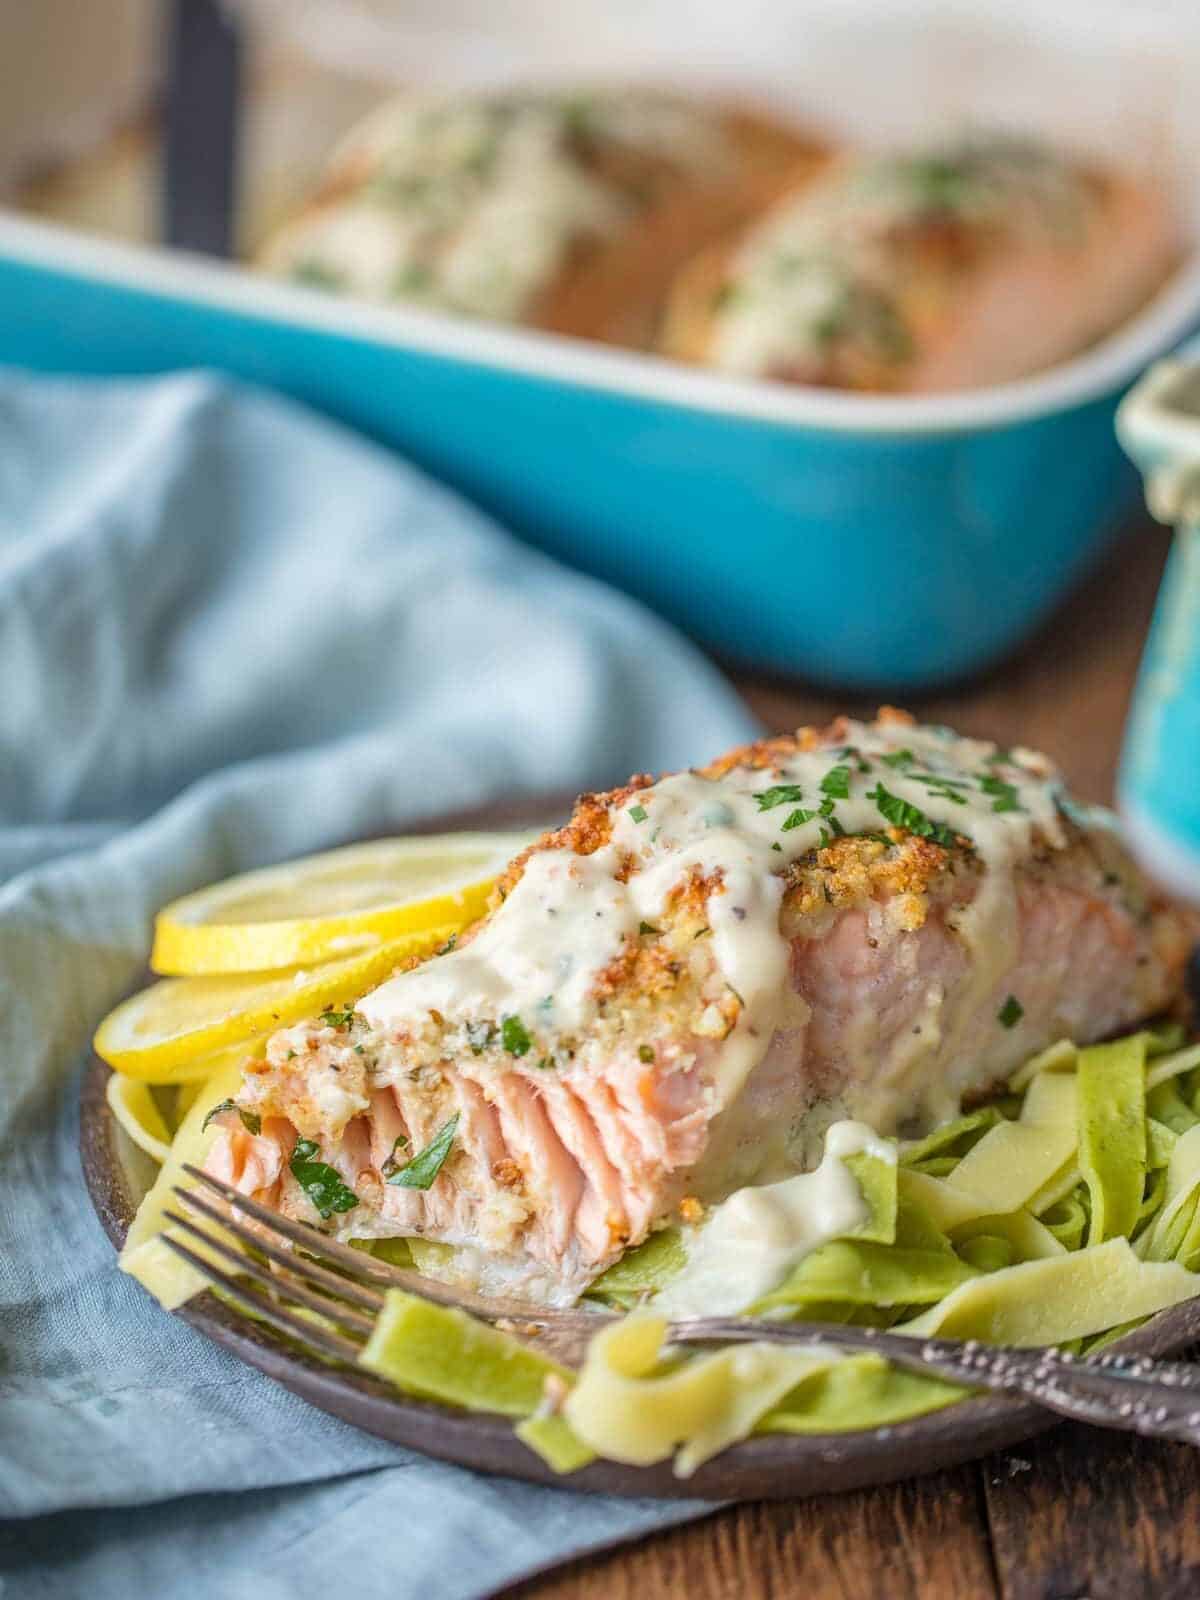 A plate of baked salmon with the baking dish in the background